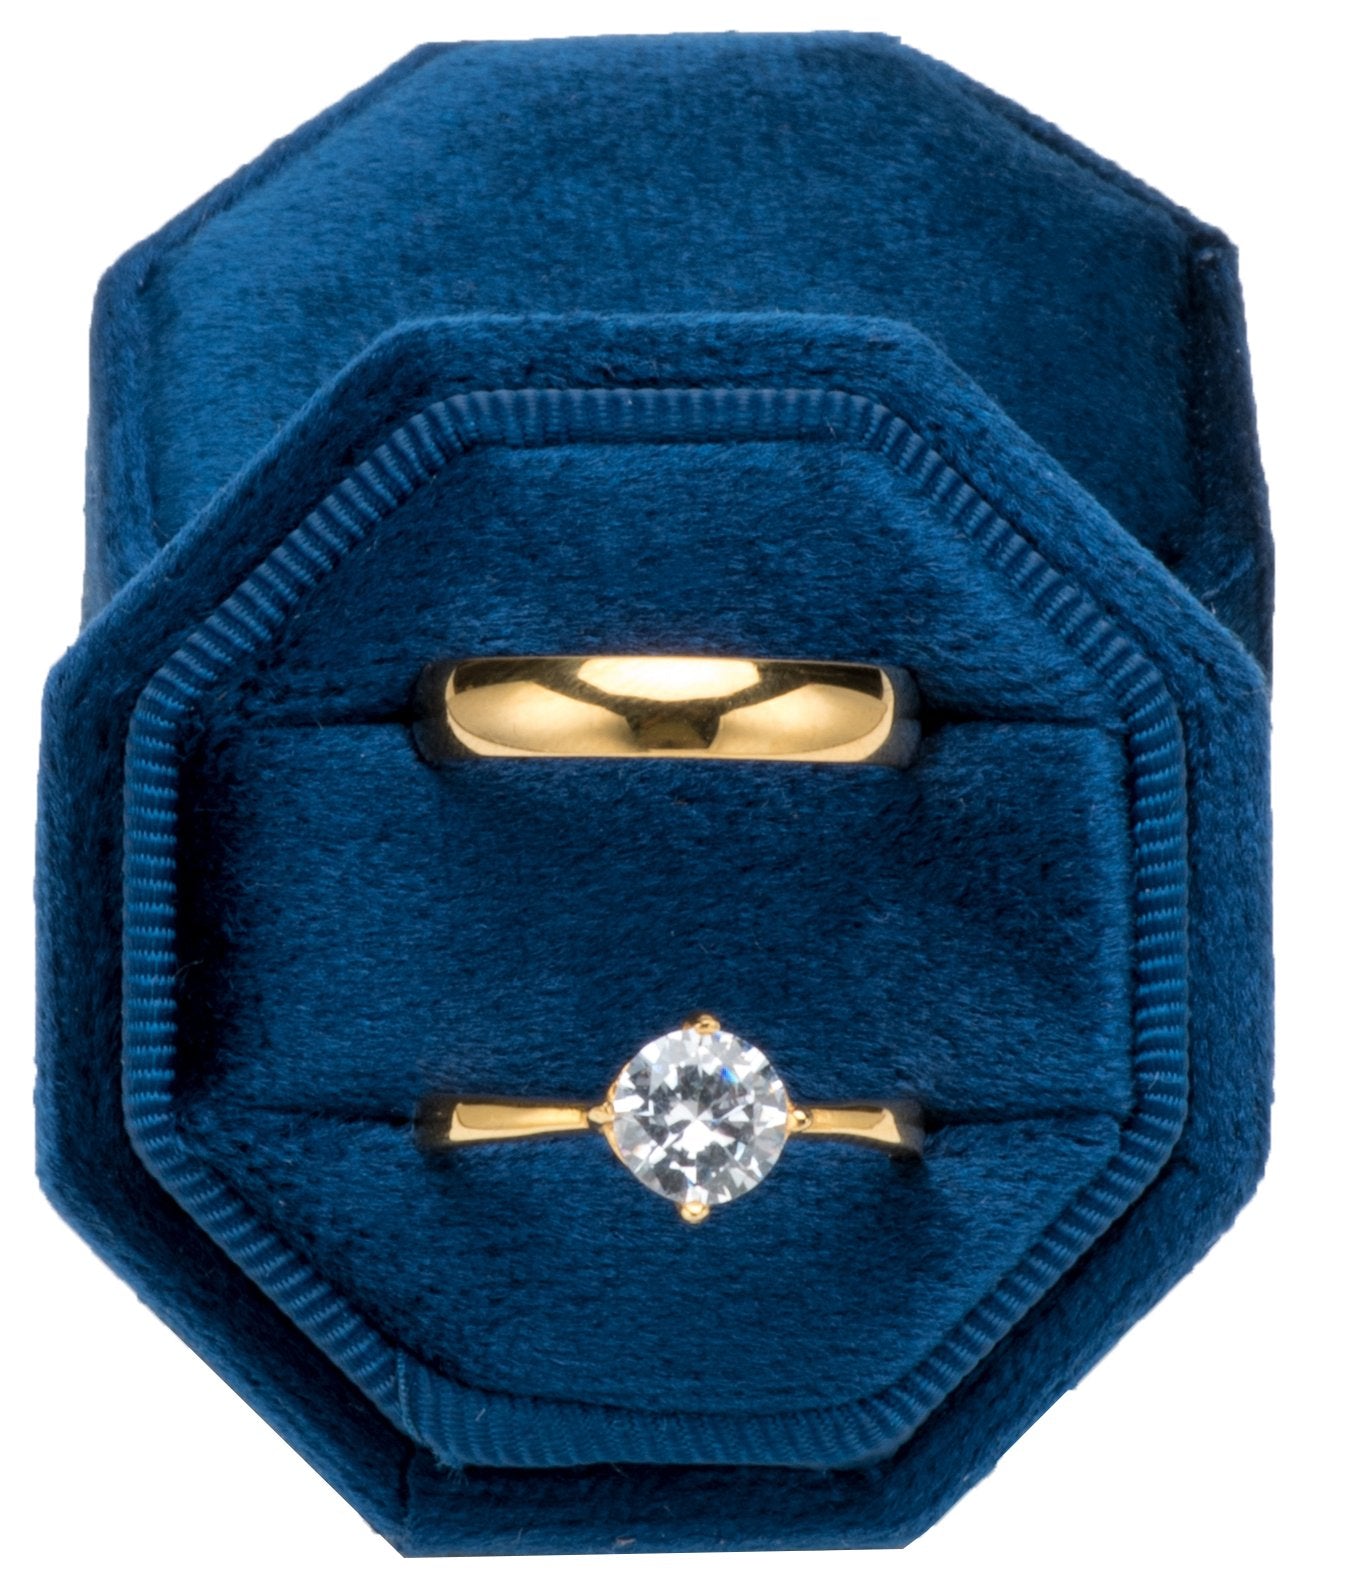 Premium Velvet Ring Box for Proposal Engagement Wedding Ceremony - Equilateral Octagon Vintage Double Ring Display Holder with Detachable Lid (Dark Blue)